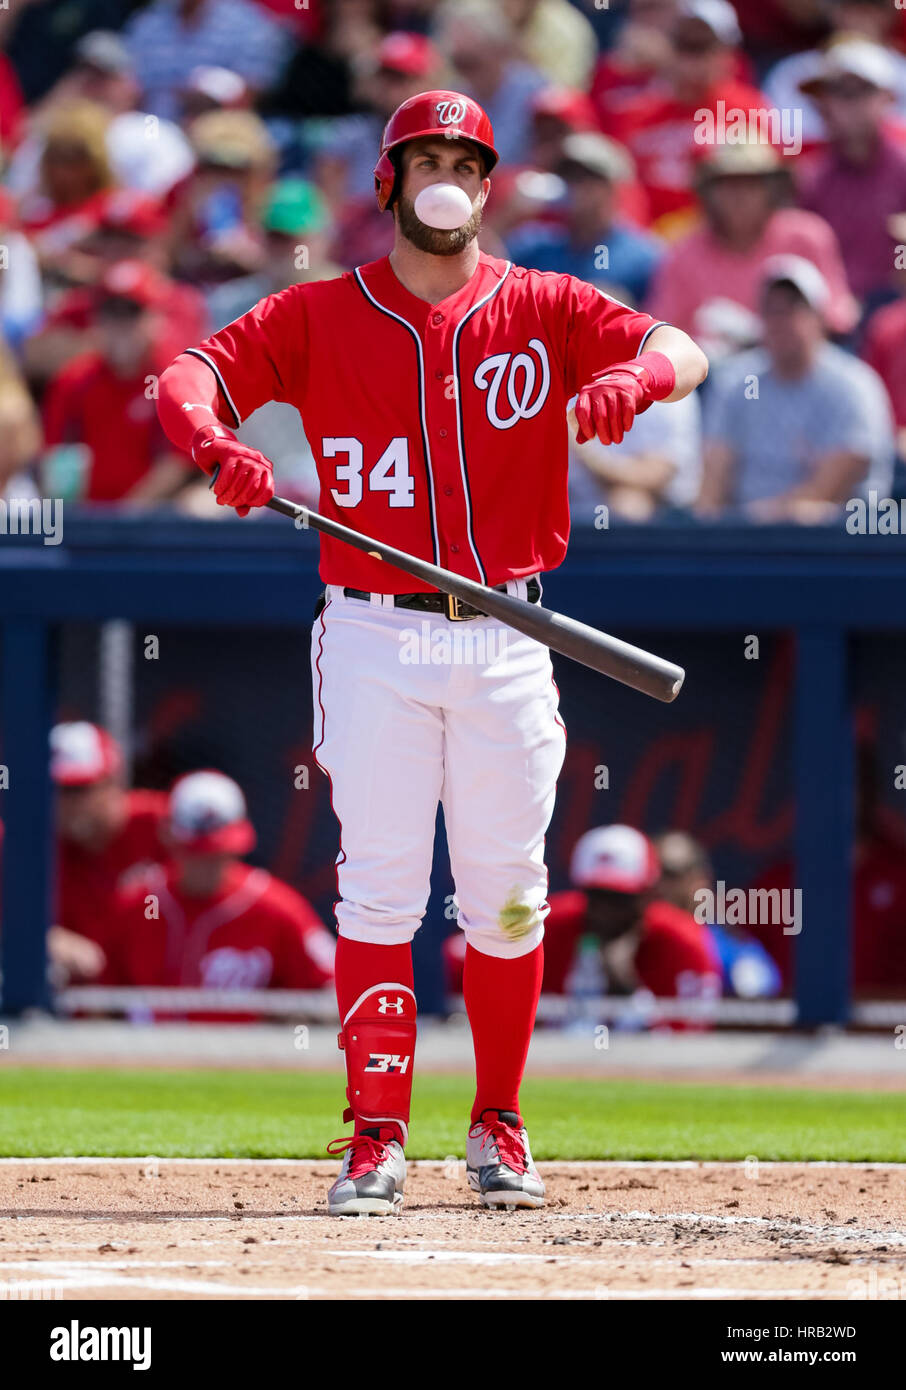 Florida, USA. 28th Feb, 2017. Bryce Harper steps away from the